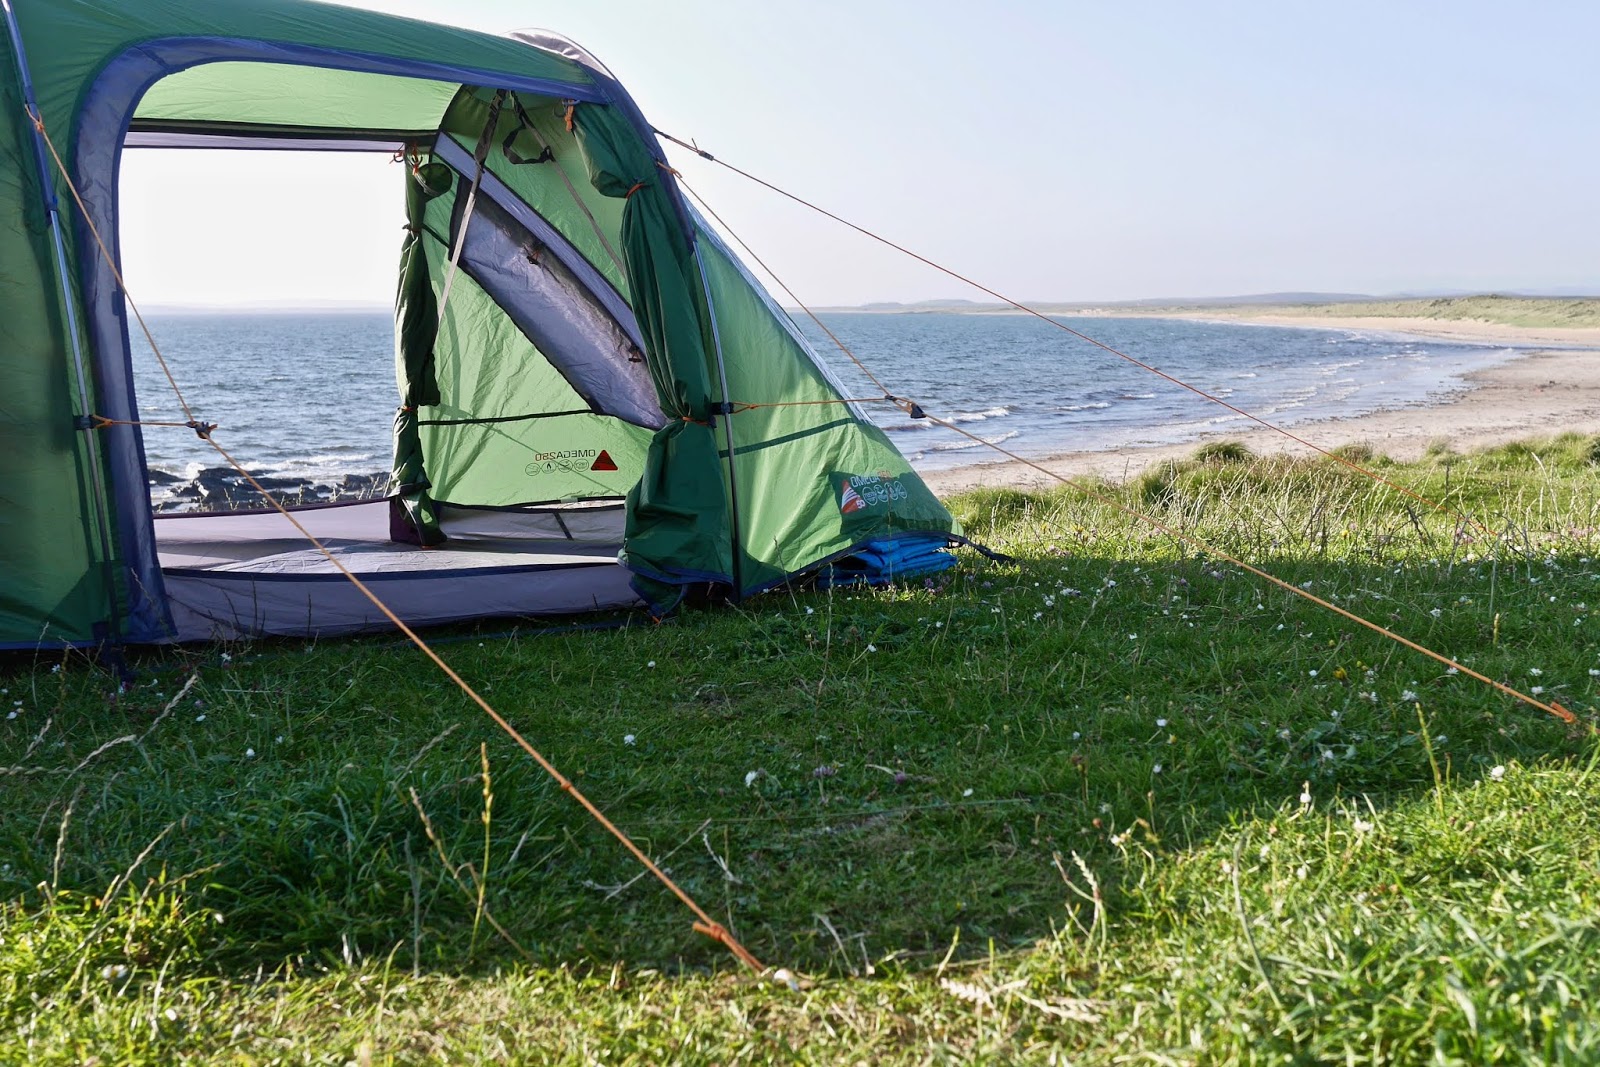 Camping in Islay, Campsites in scotland that allow fires